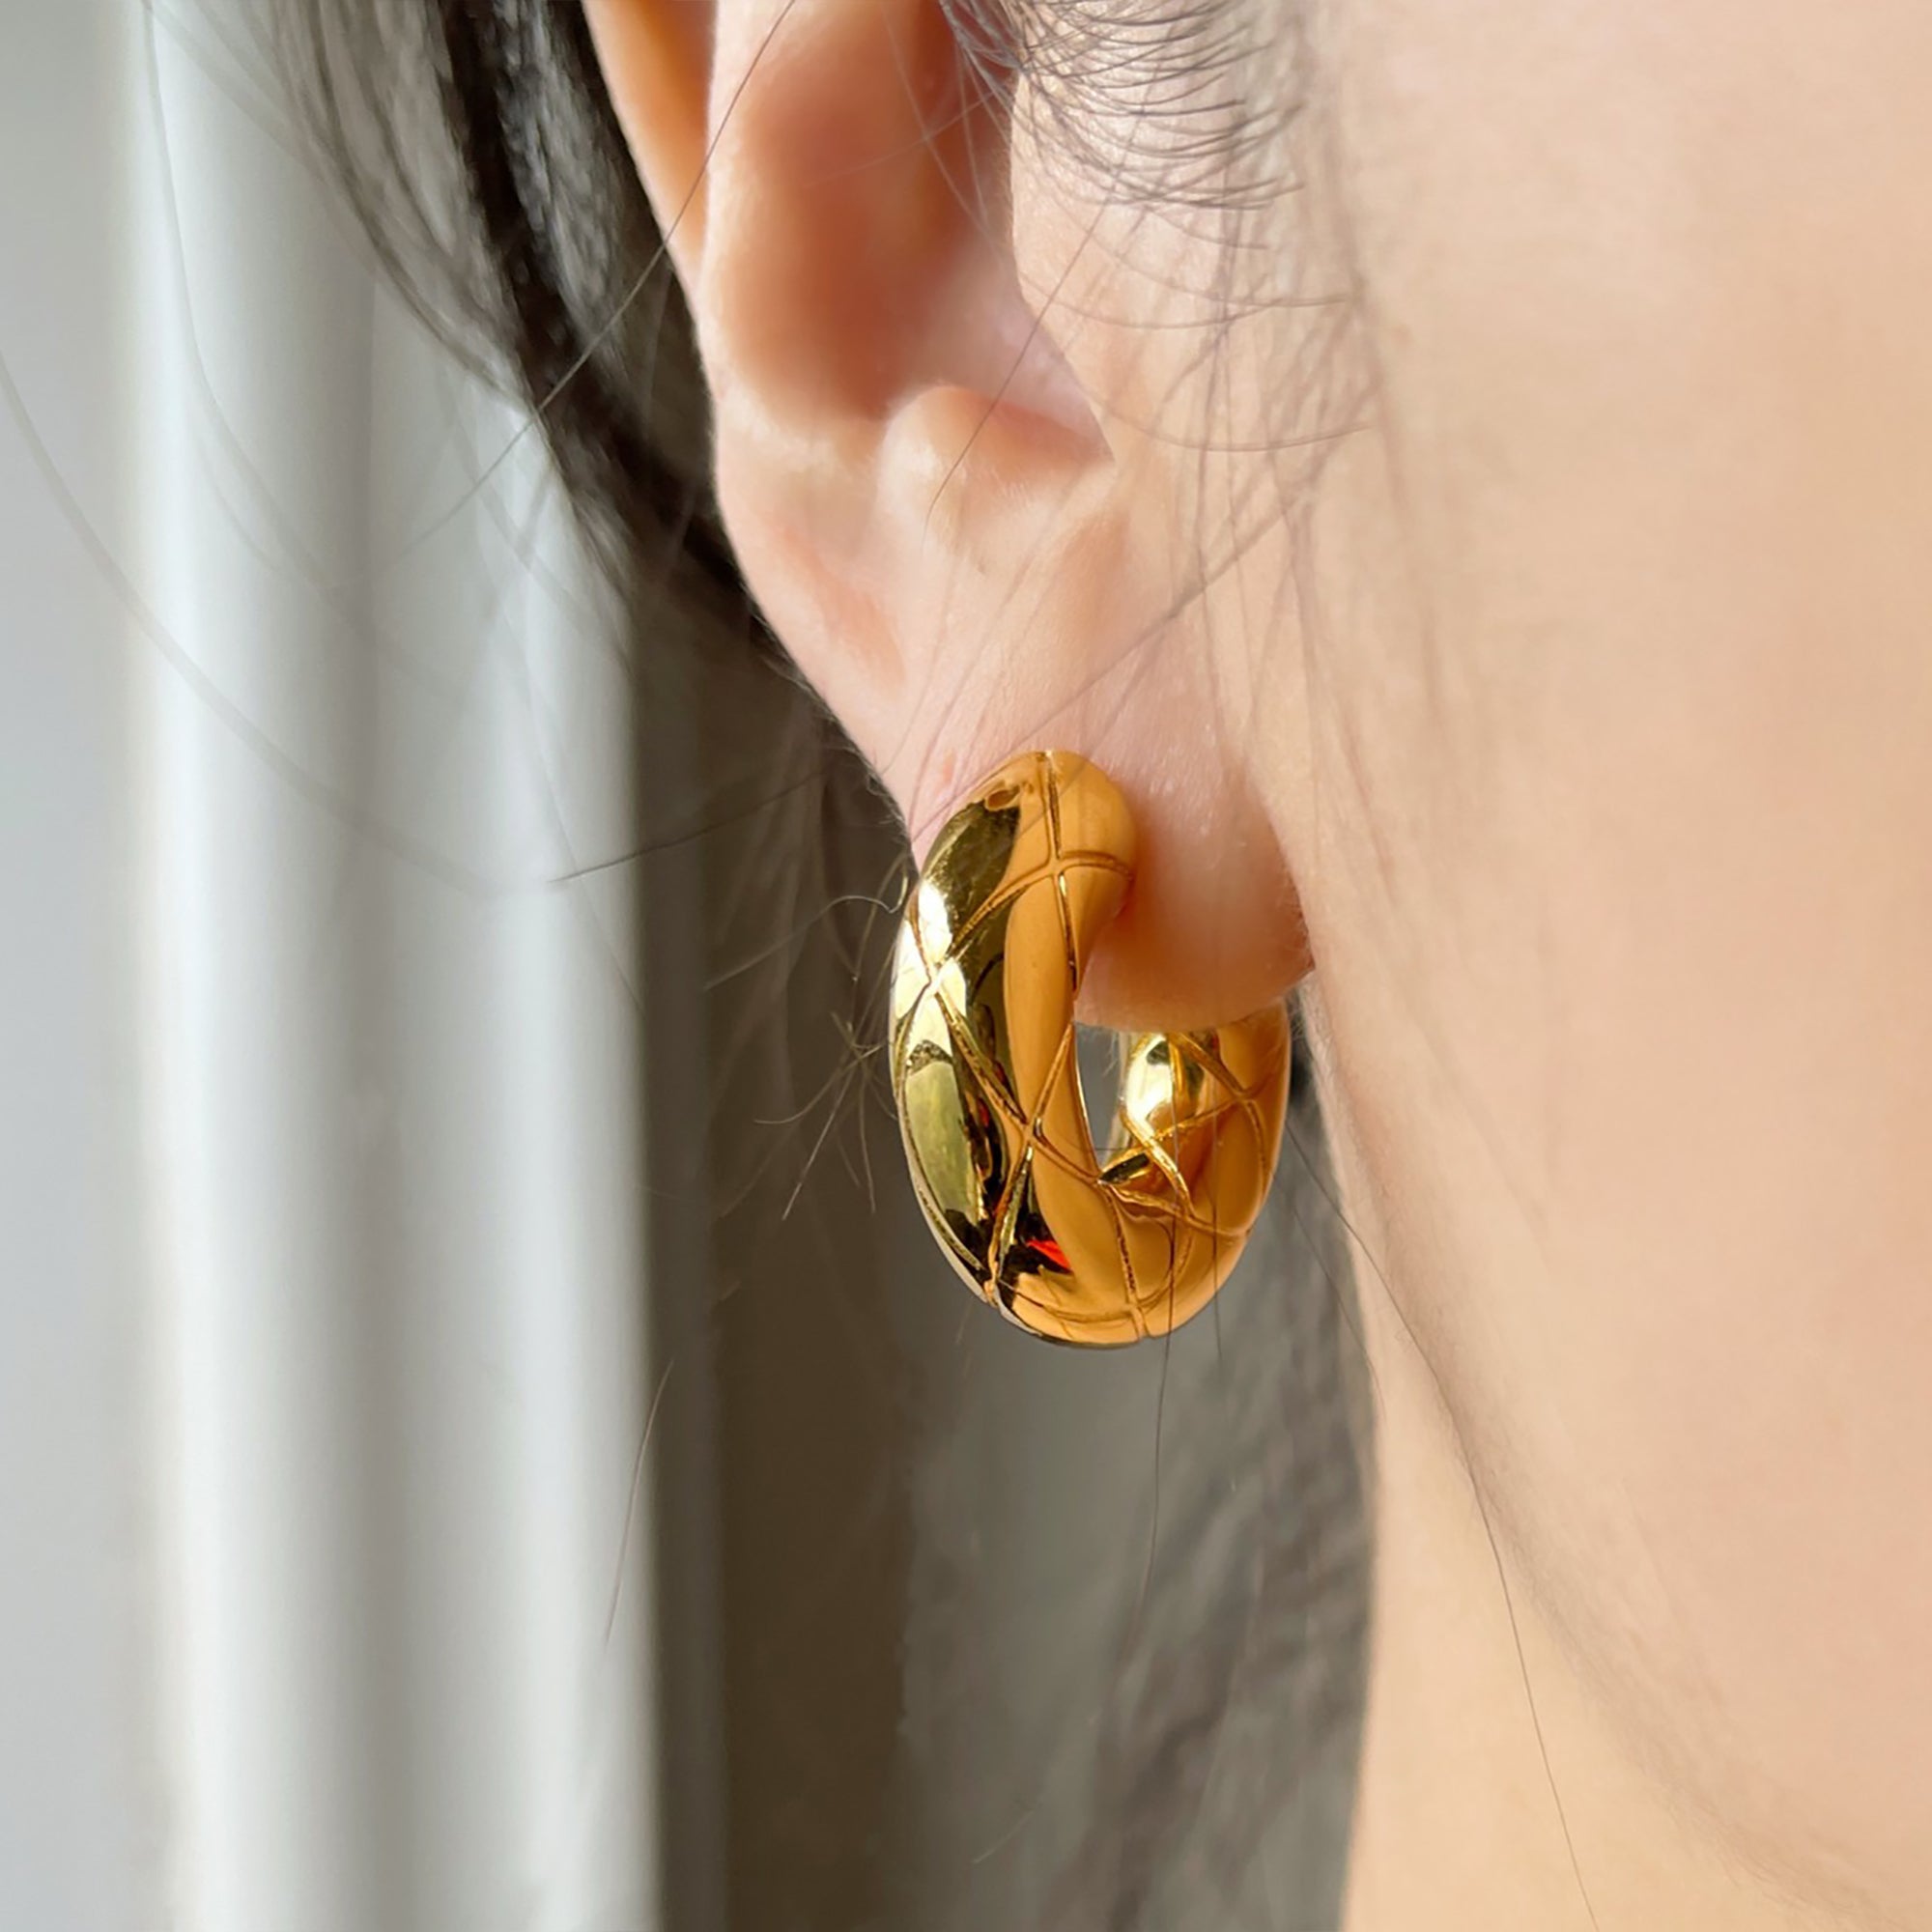 Gold Plated Diamond Check Hoop Earrings Valentine Day Gif